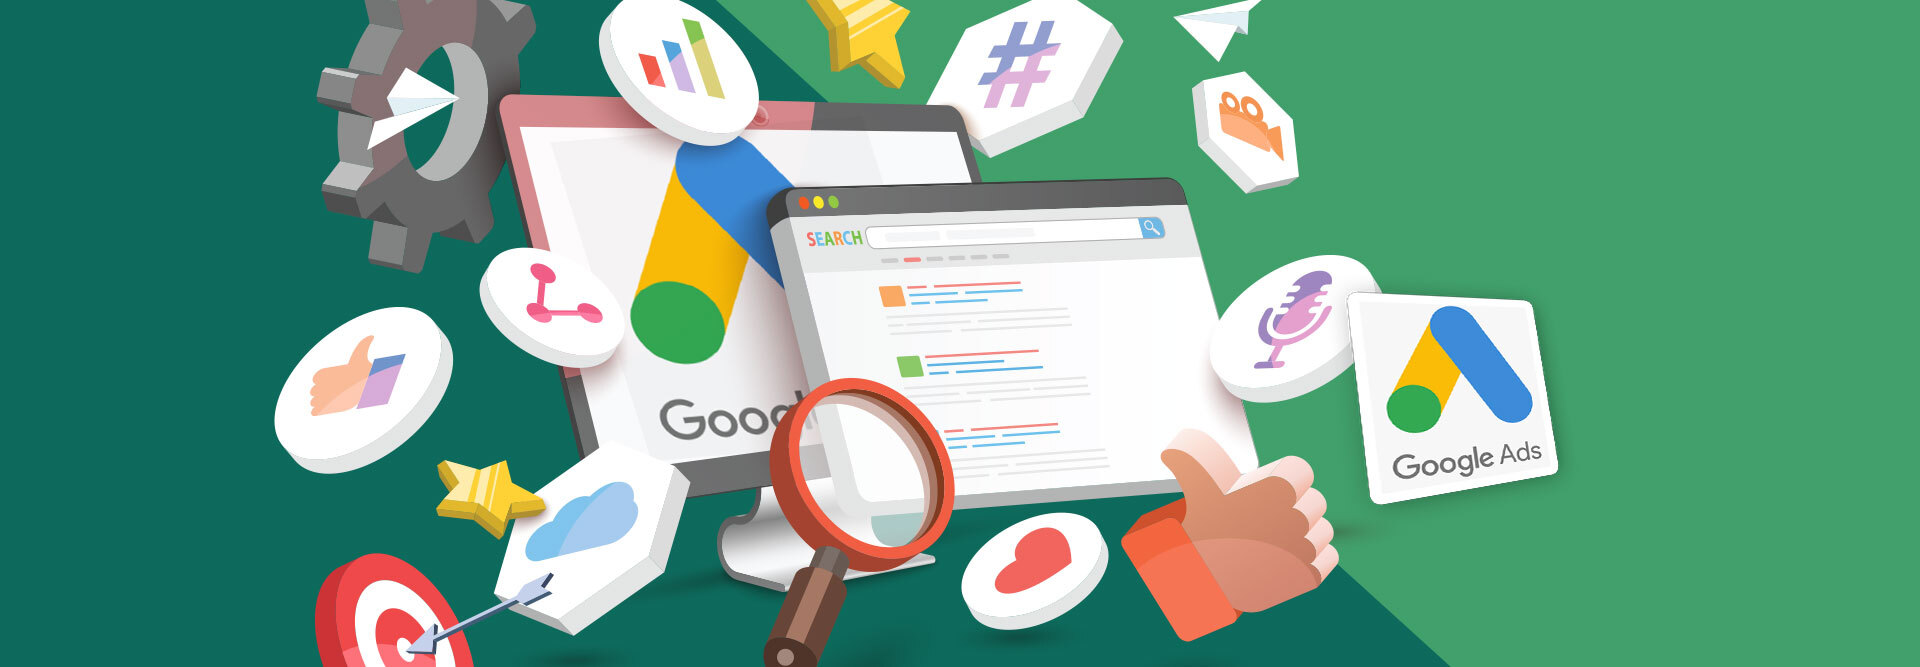 Google Ad Management Services: Everything You Need to Know